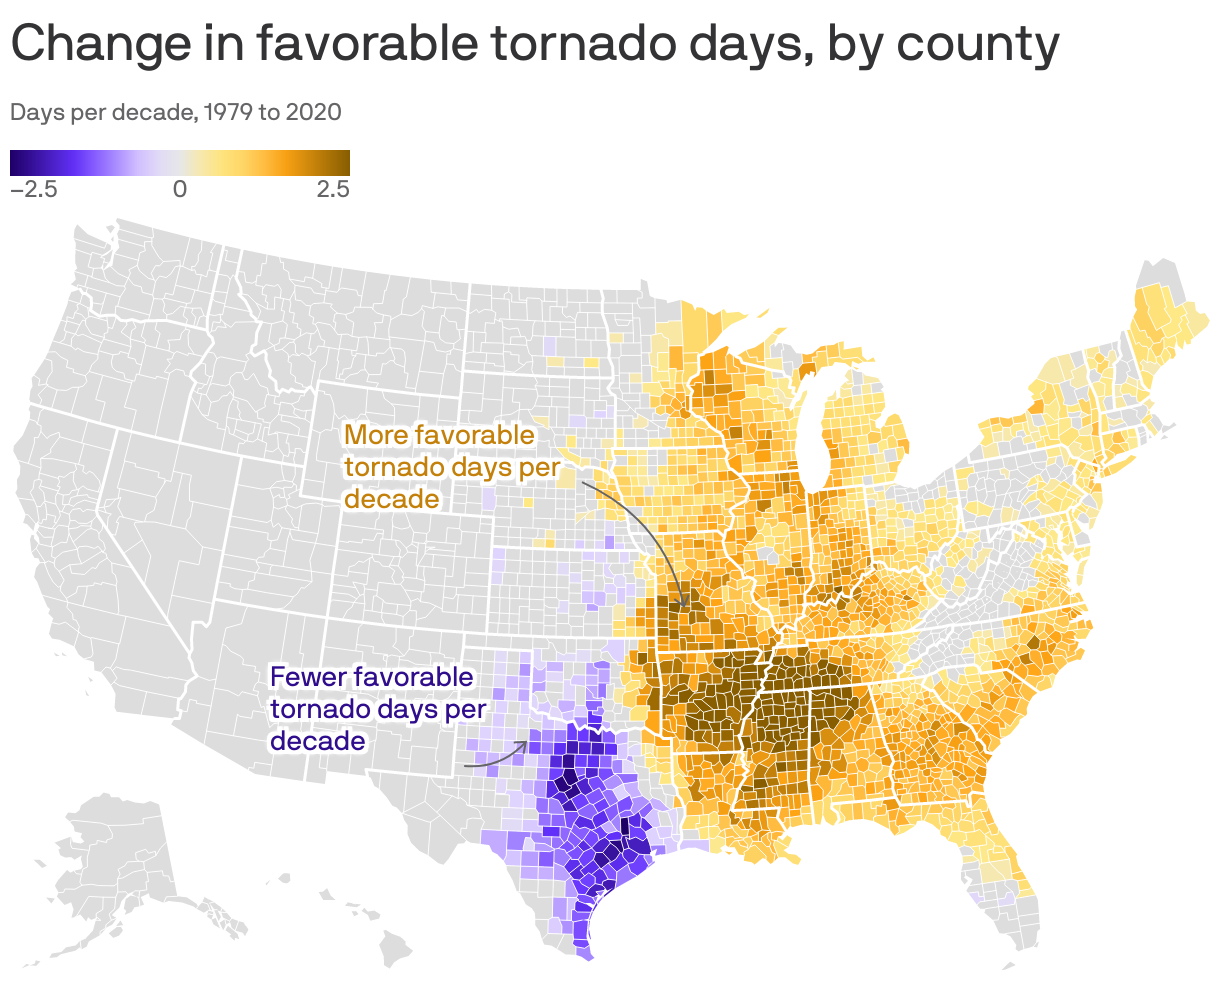 Change in favorable tornado days, by county